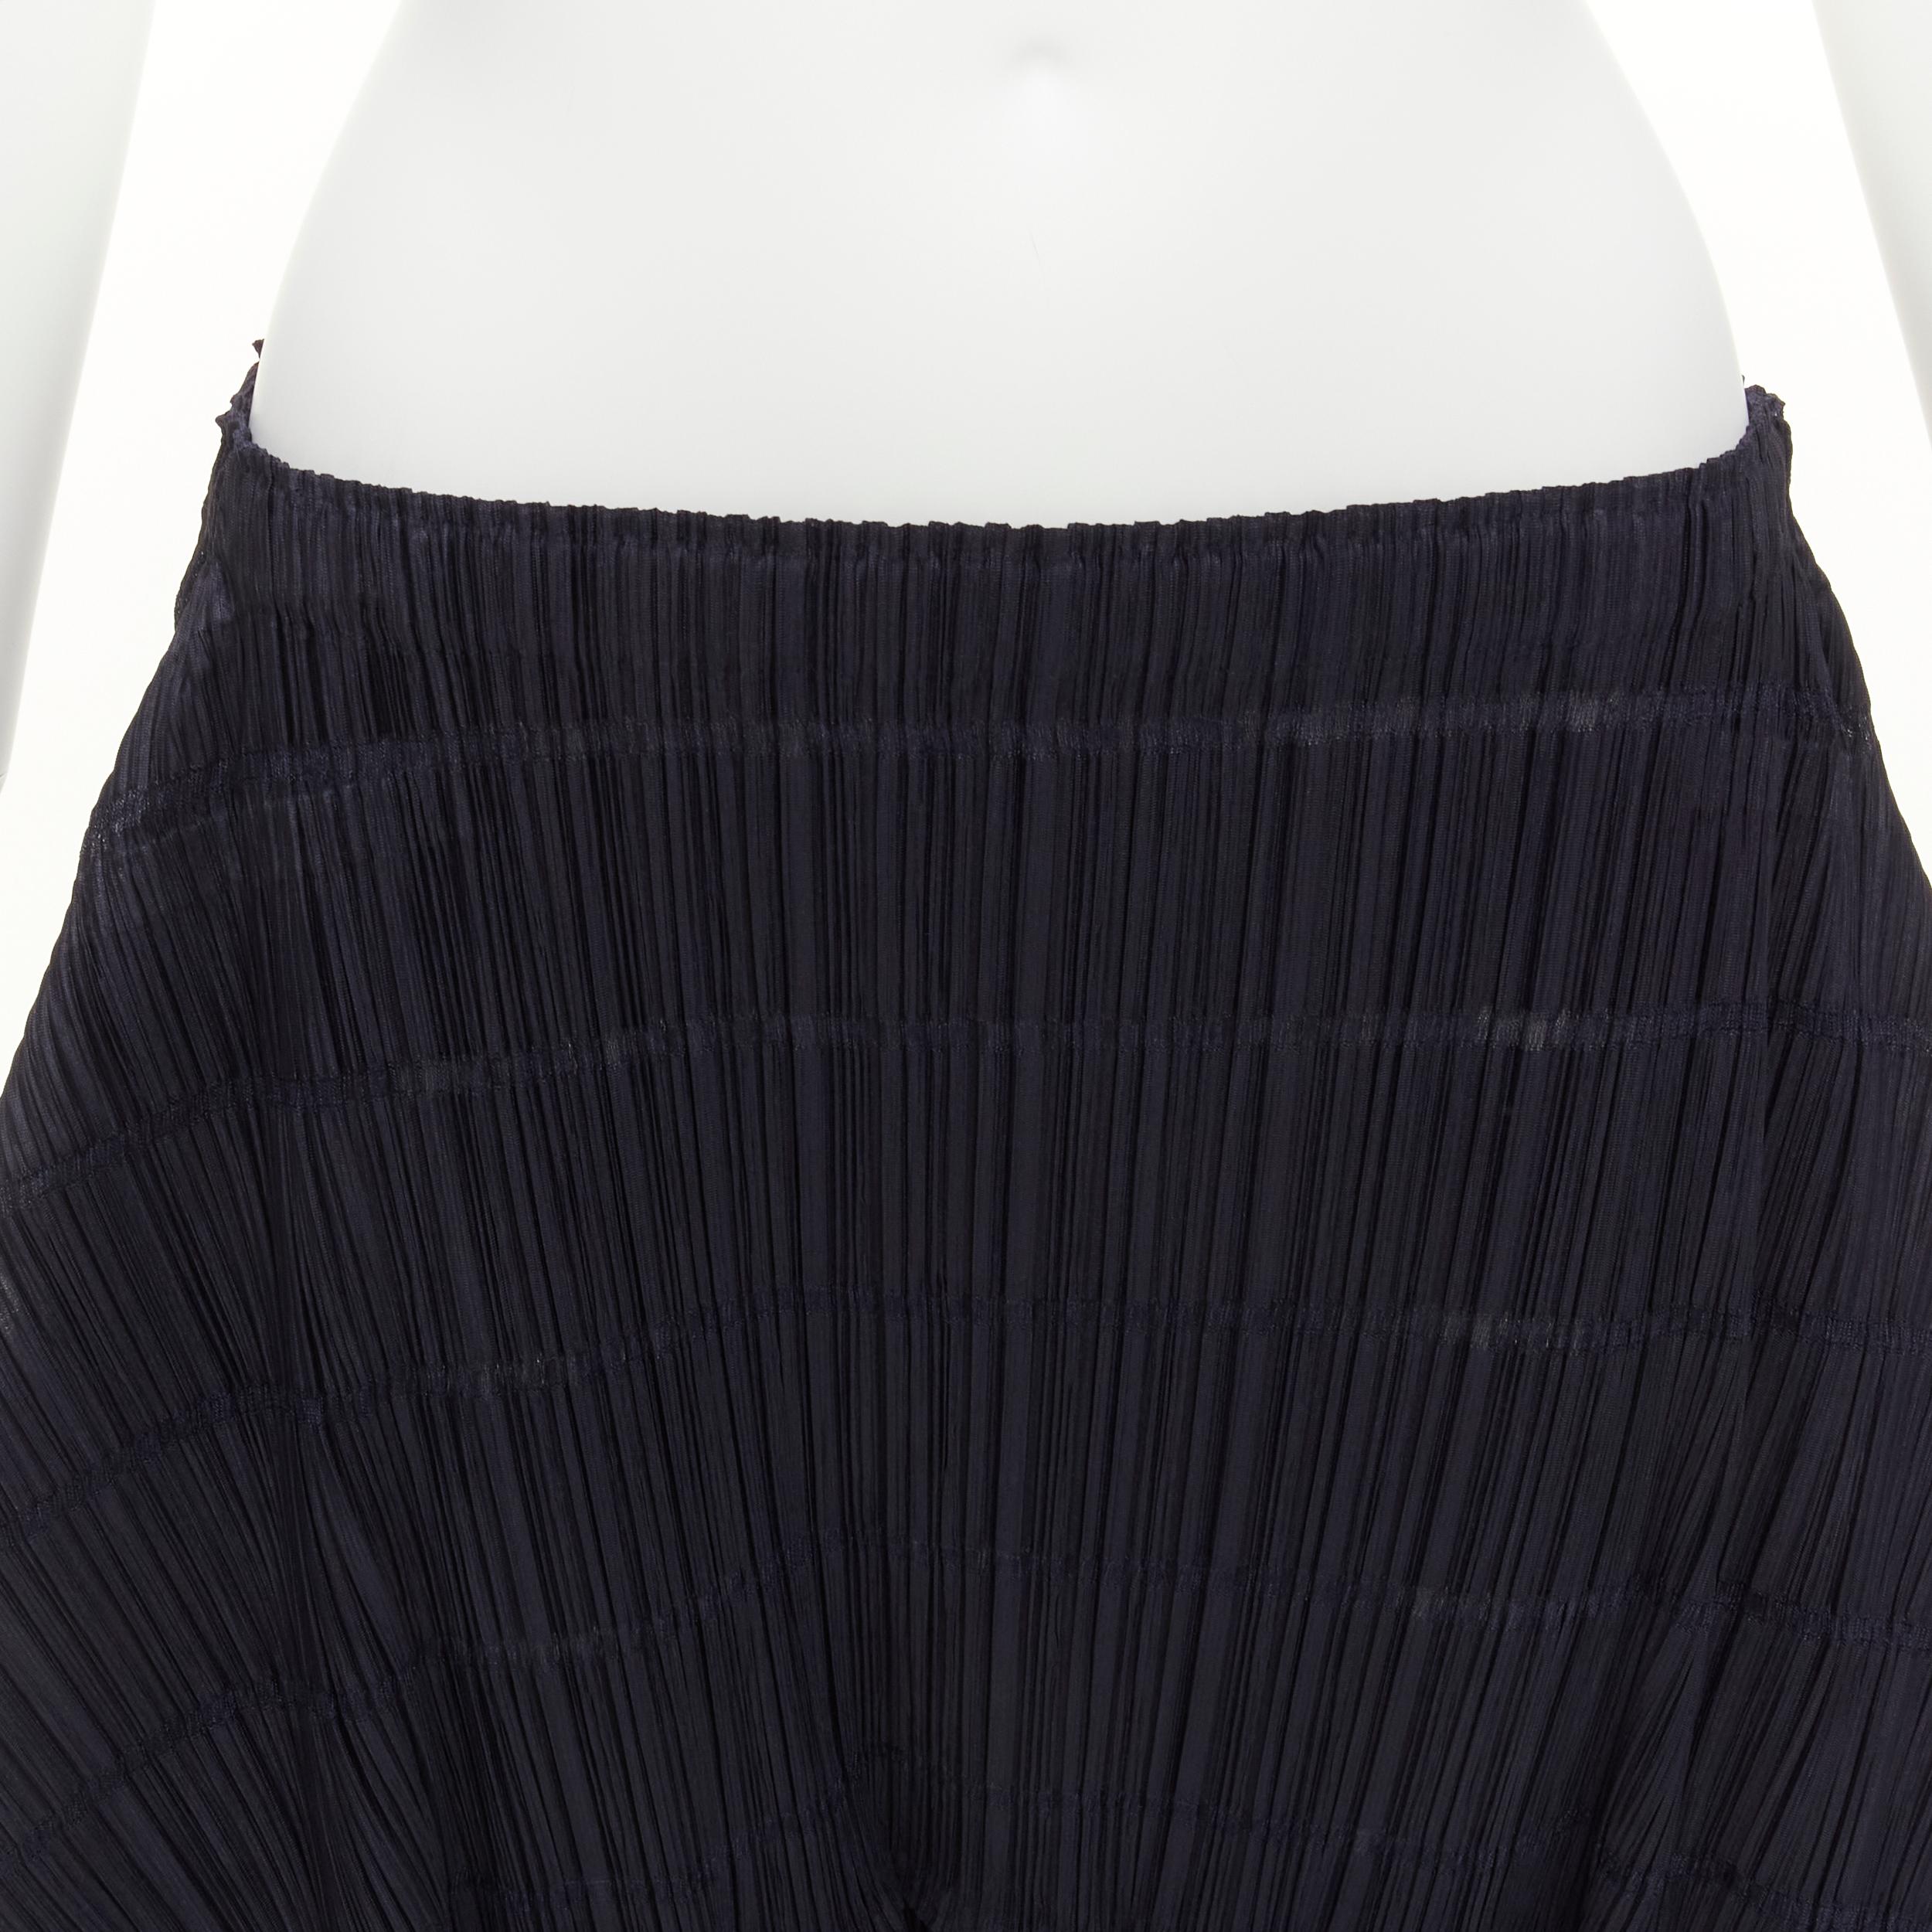 ISSEY MIYAKE PLEATS PLEASE navy 3D cut drop crotch circle shorts M For Sale 3